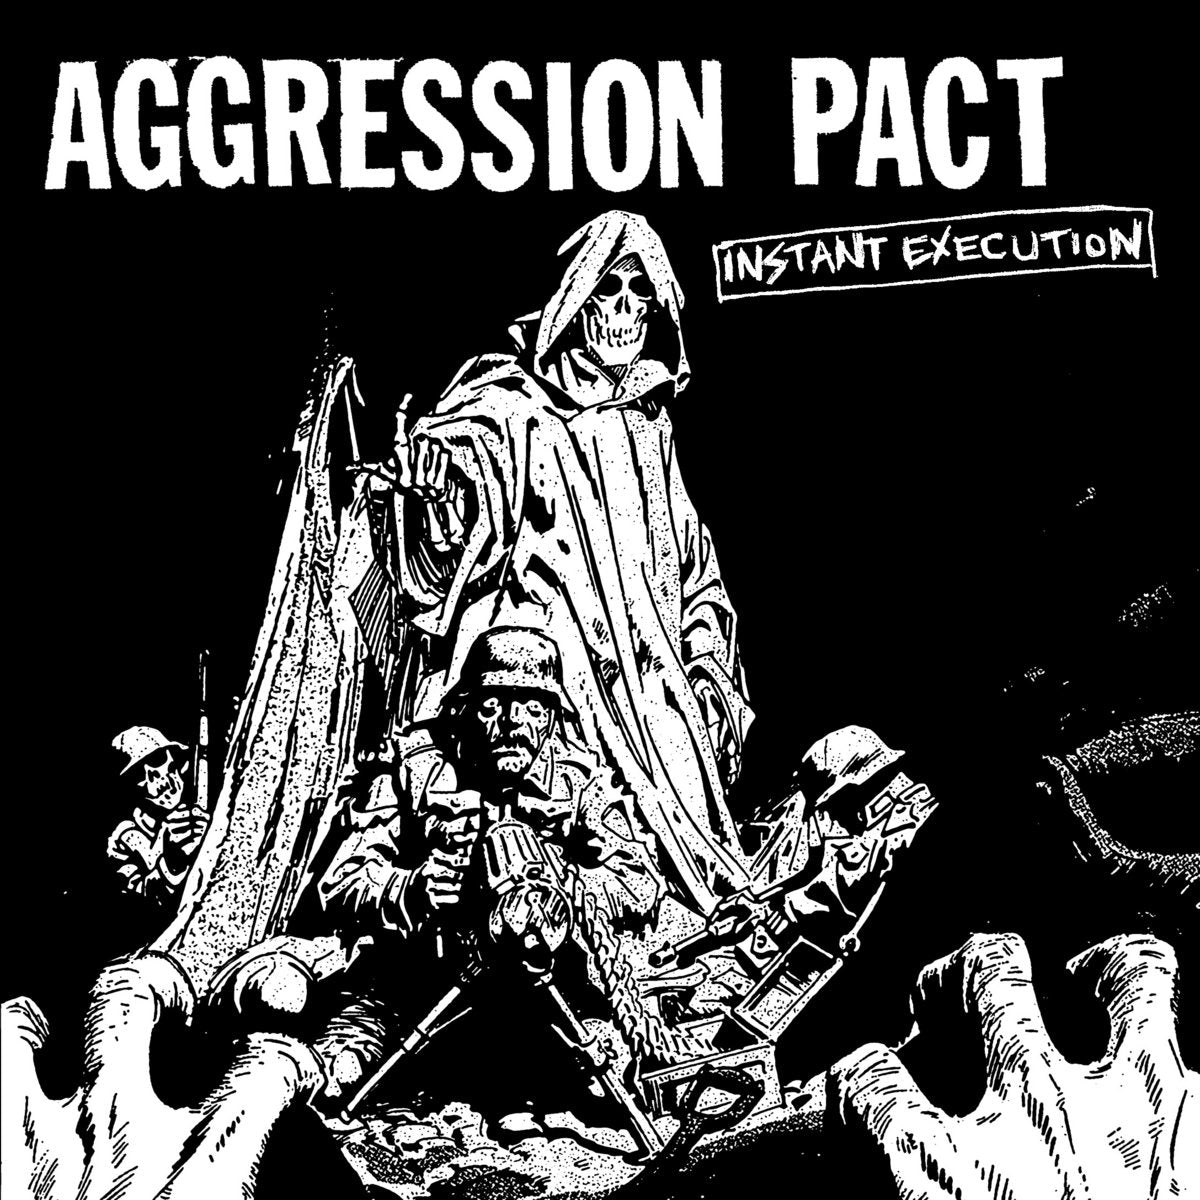 AGGRESSION PACT 'Instant Execution' 7" / COKE BOTTLE CLEAR EDITION